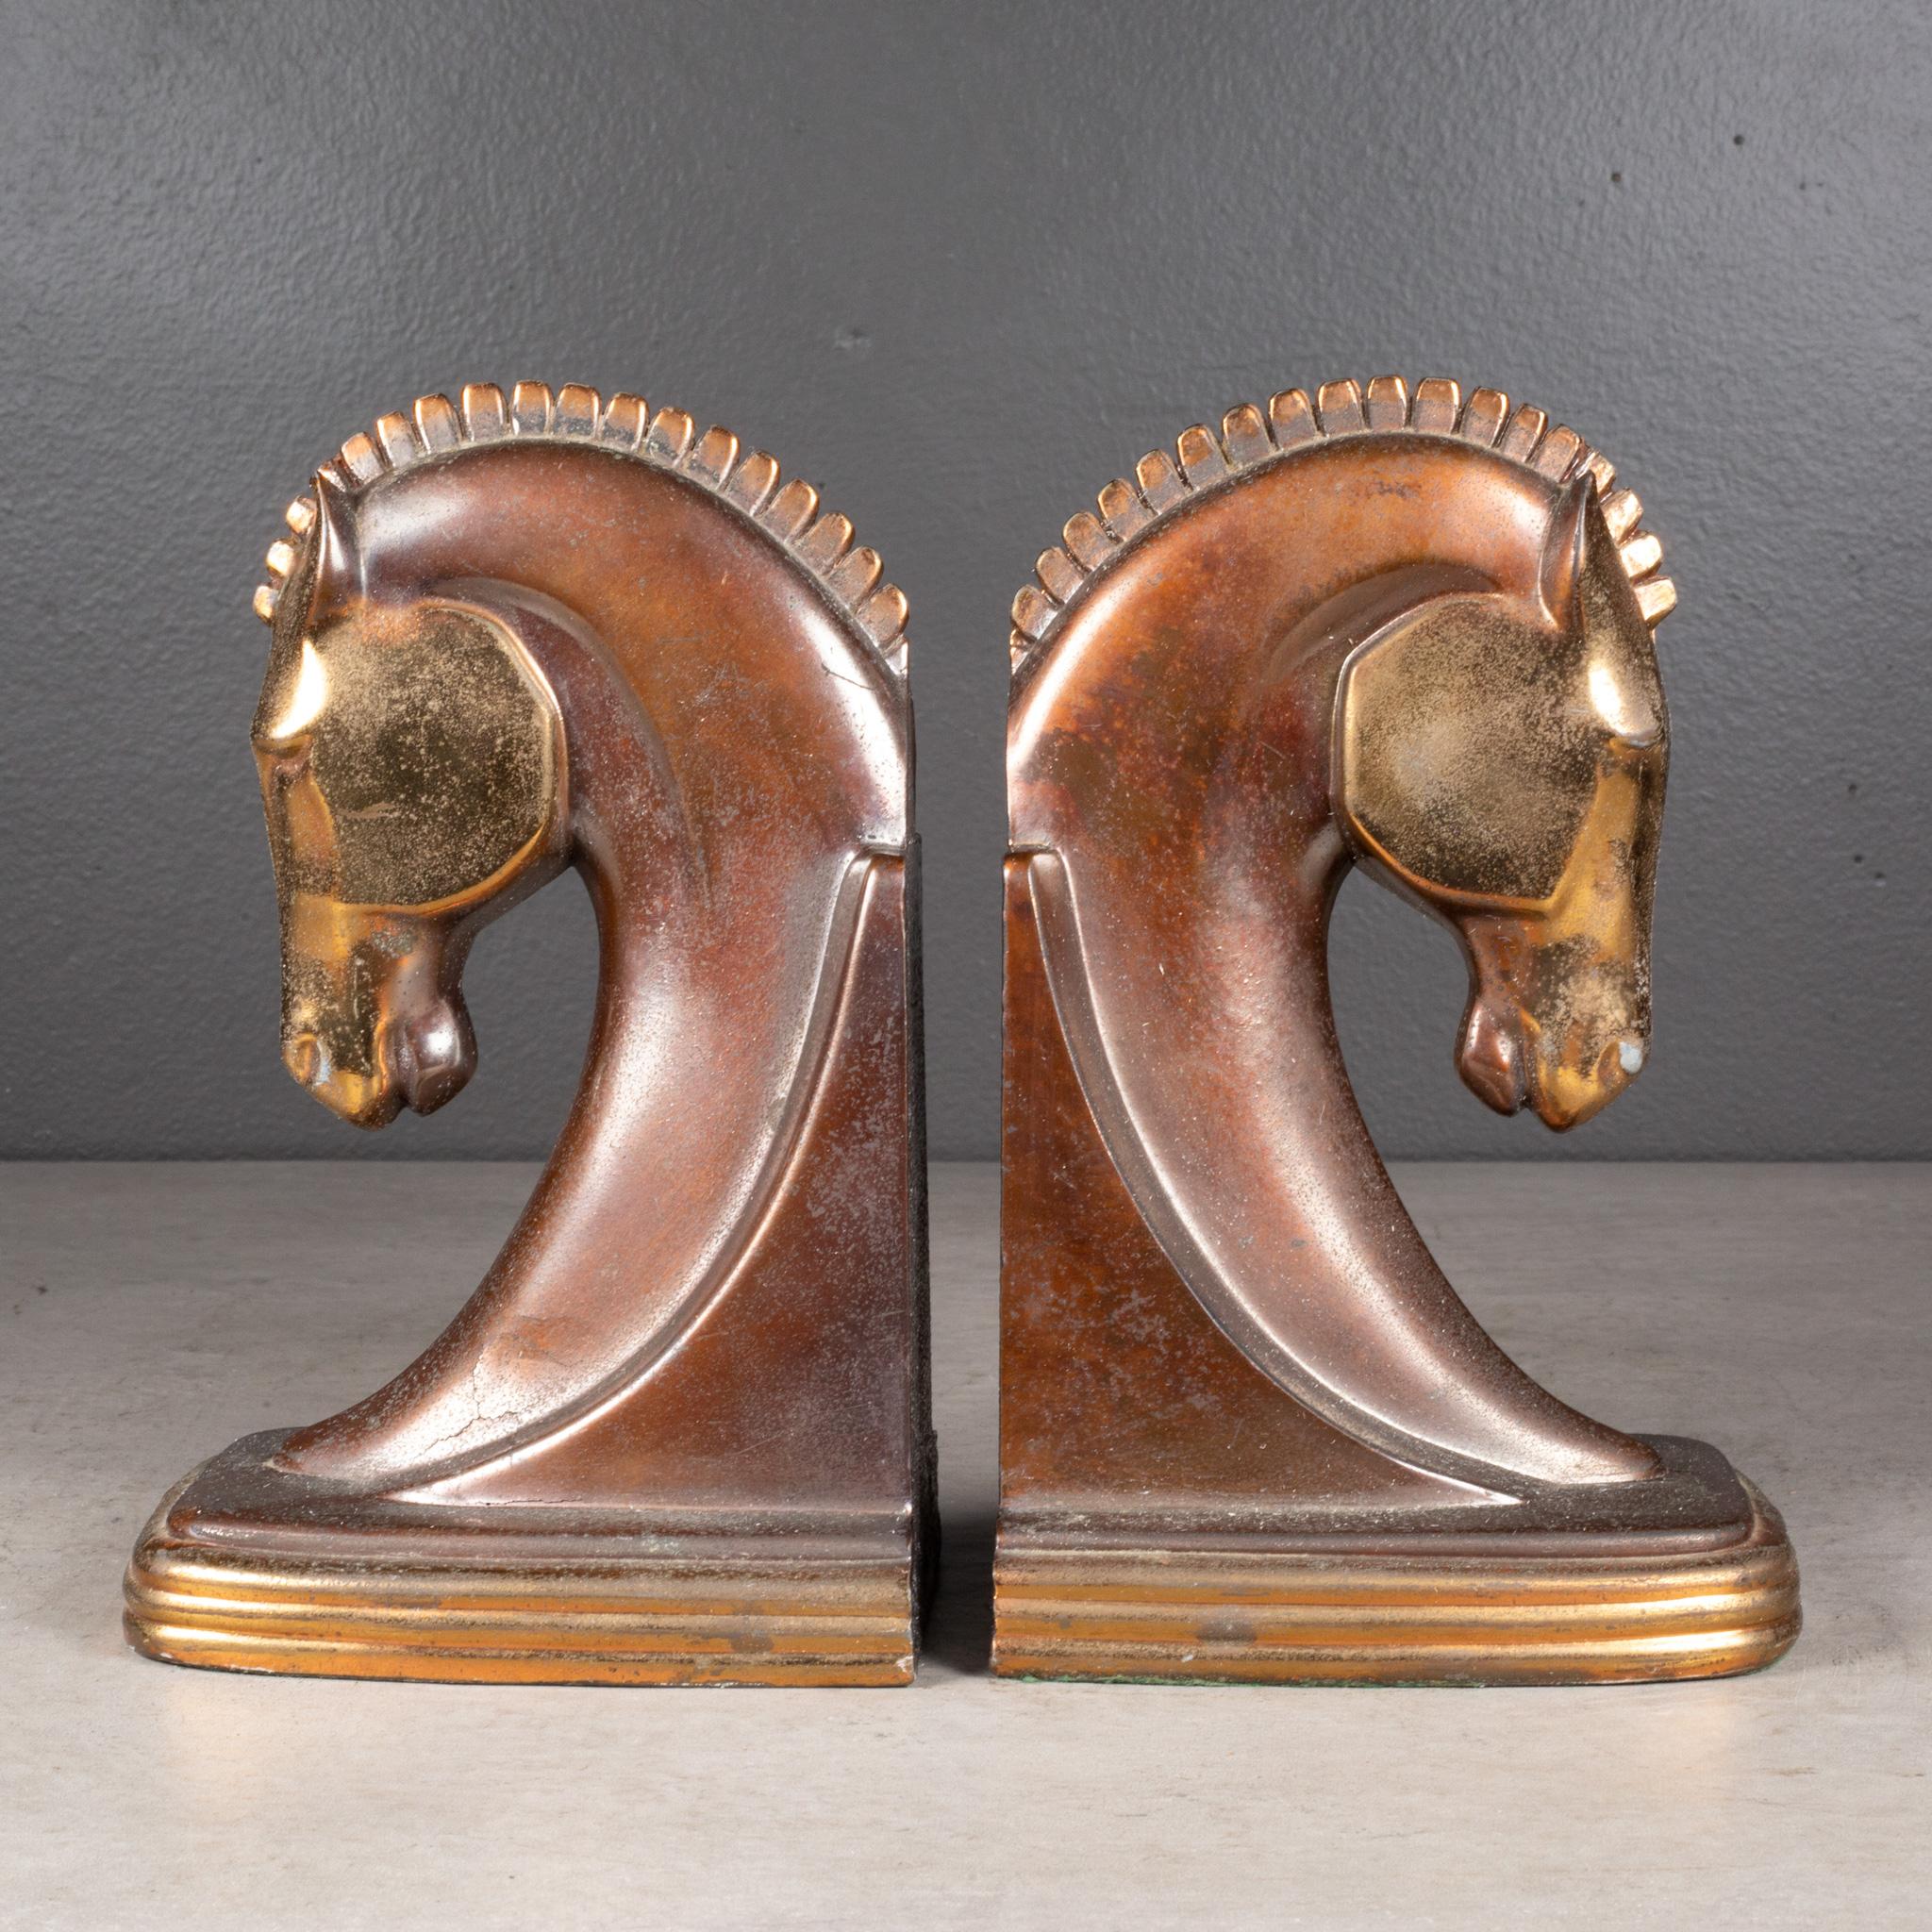 Plated Art Deco Trojan Horse Bookends by Dodge Inc. c.1930